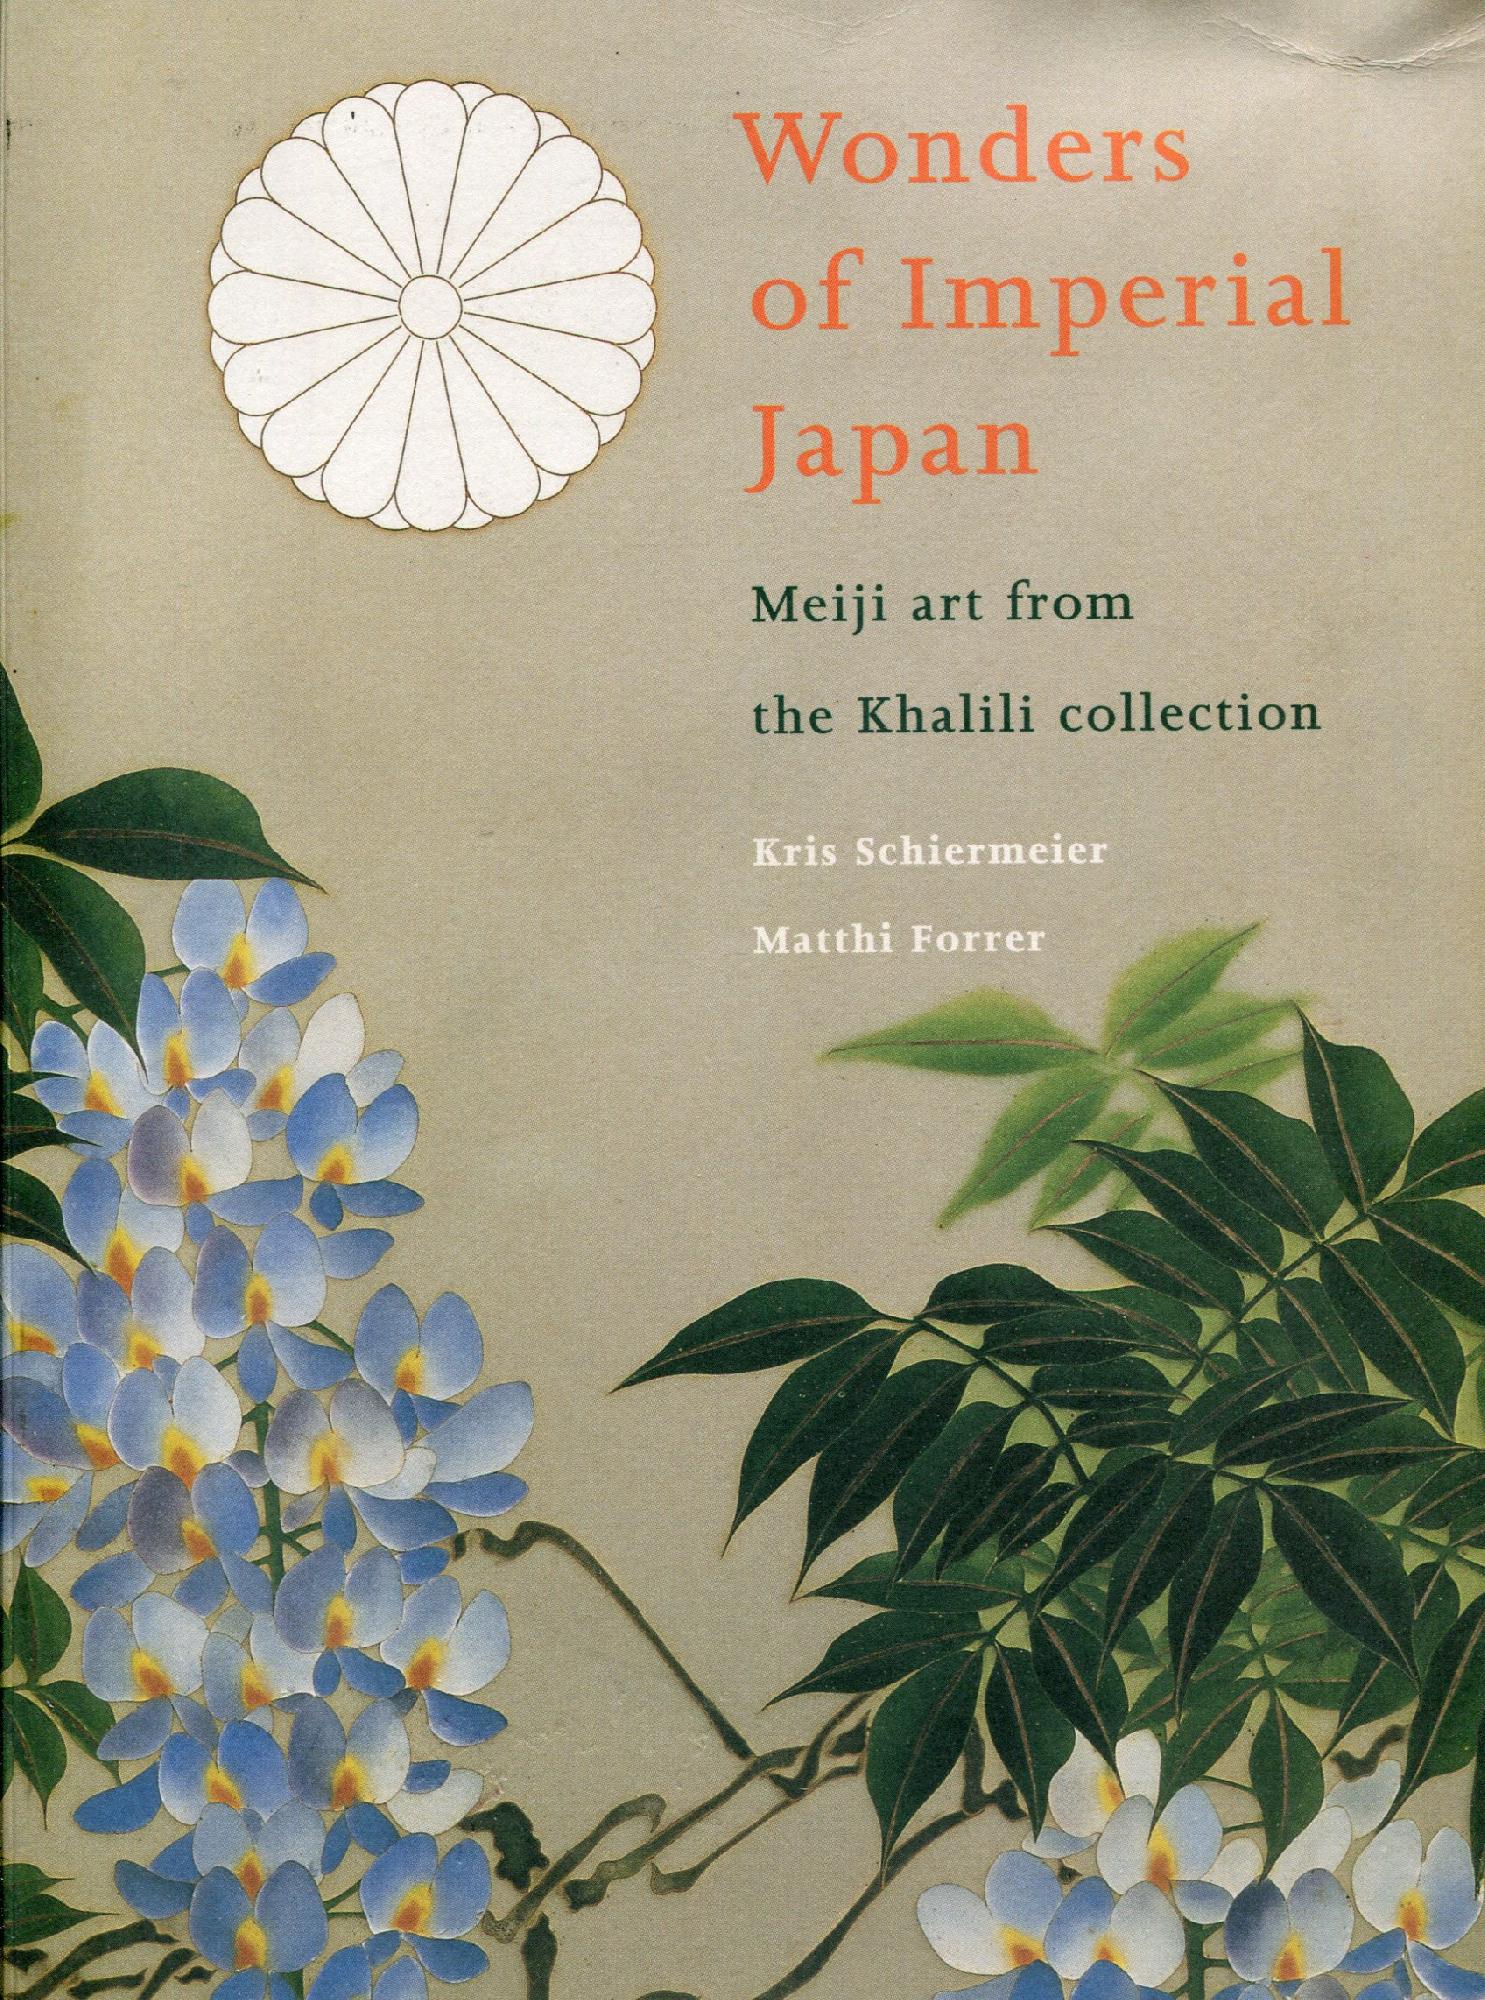 Wonders of Imperial Japan. Meiji art from the Khalili collection - SCHIERMEIER, Kris and Forrer, Matthi